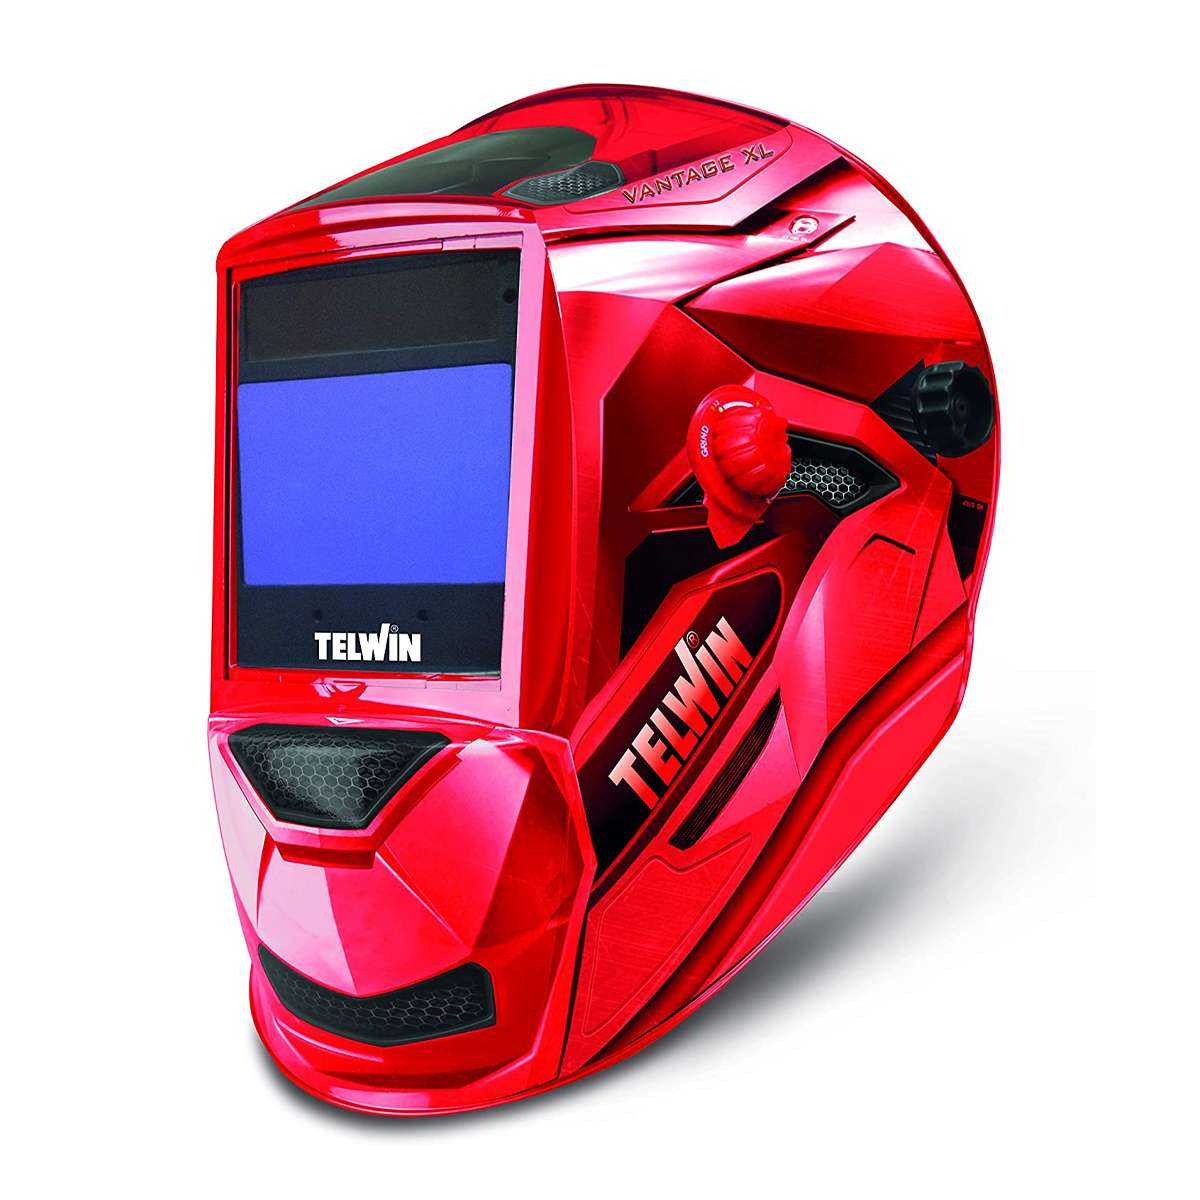 Automatic welding mask VANTAGE RED XL - Telwin - 802936